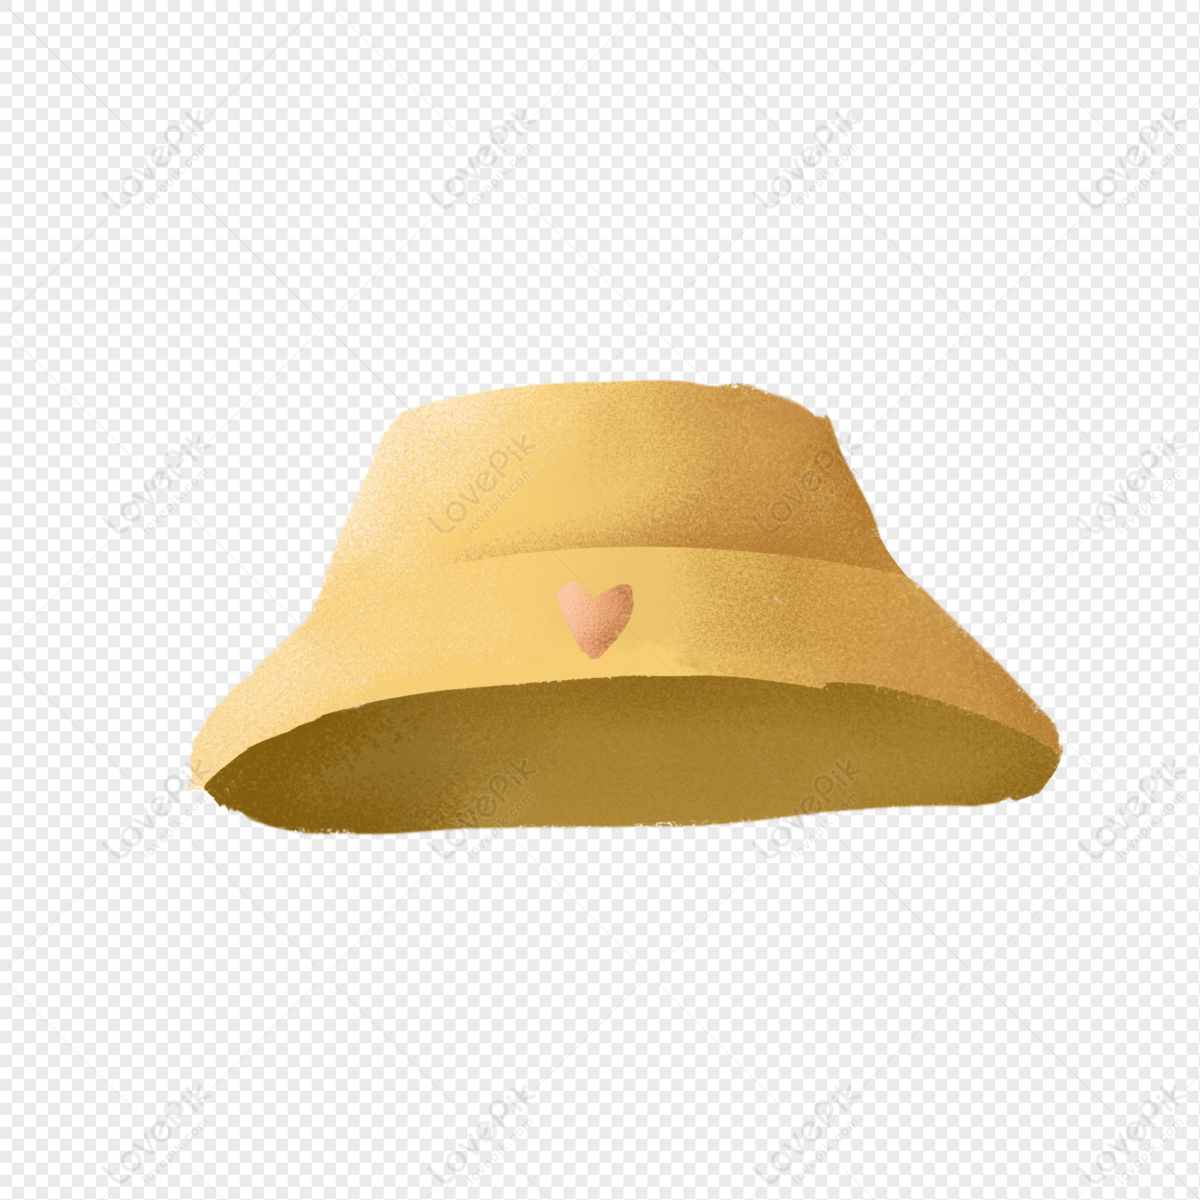 Fishing Hat Man, Fish Man, Fish, Hat PNG Picture And Clipart Image For Free  Download - Lovepik